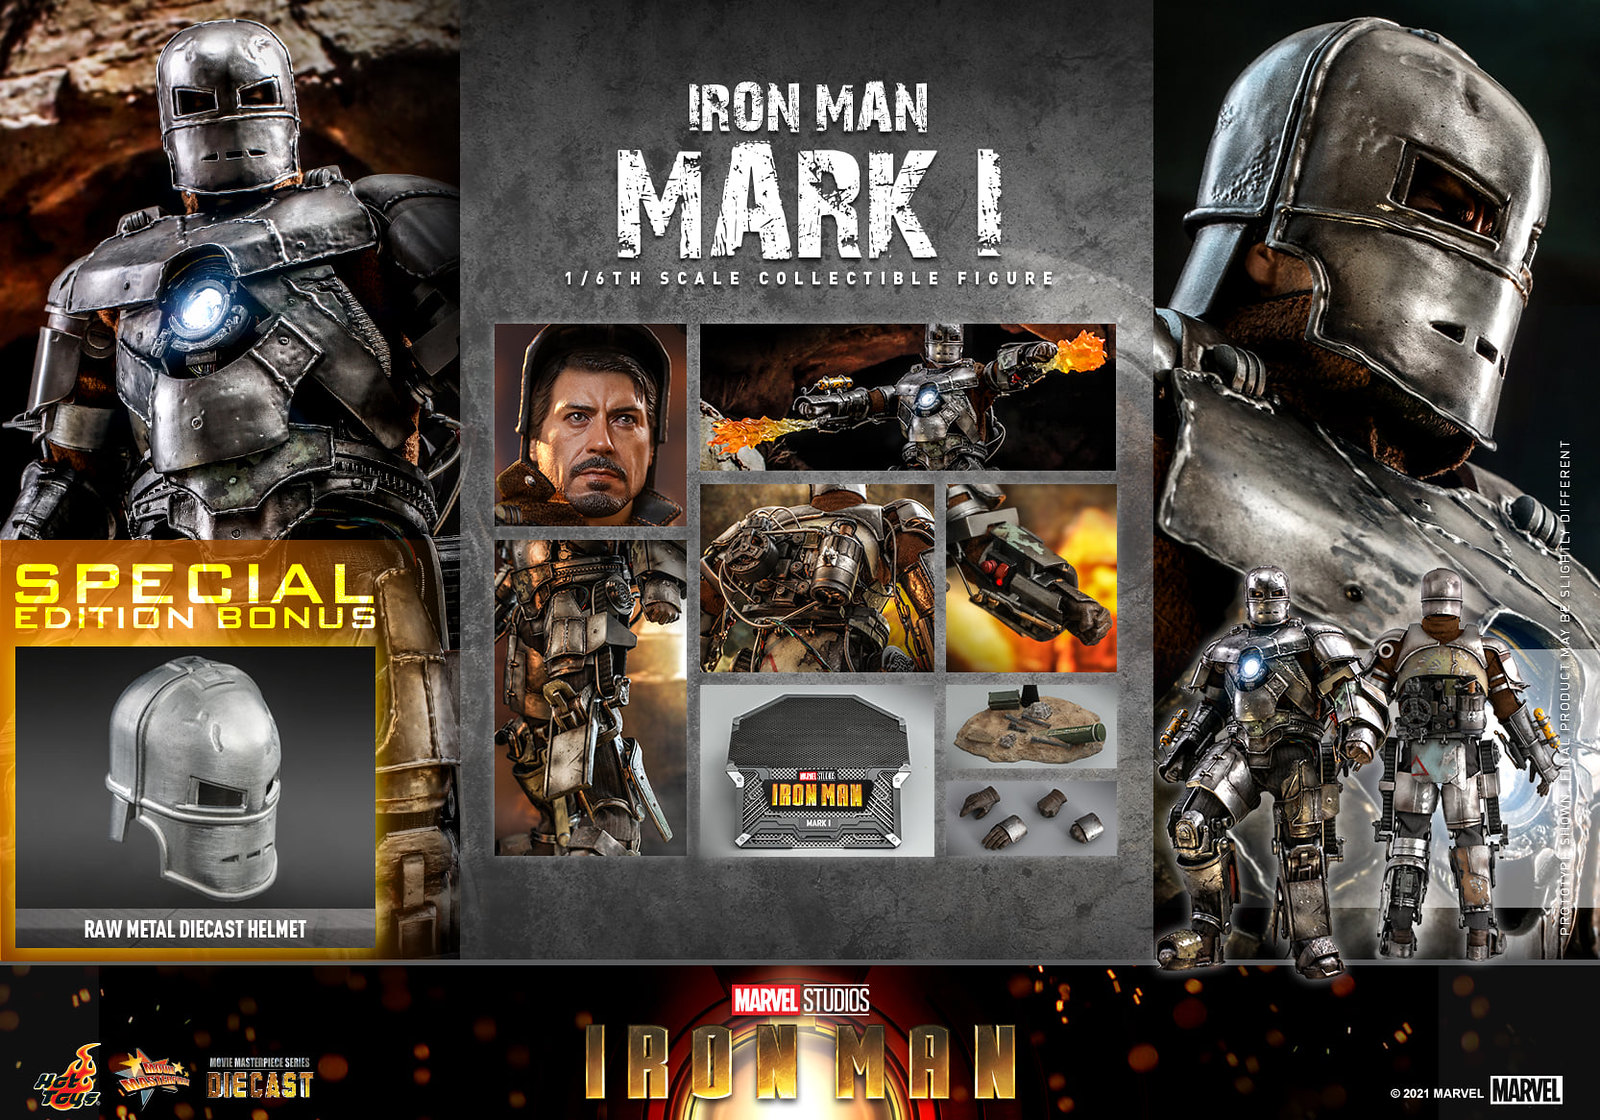 NEW PRODUCT: Hot Toys Iron Man - 1/6th scale Iron Man Mark I Collectible Figure 51311457028_ff9f3d402f_h